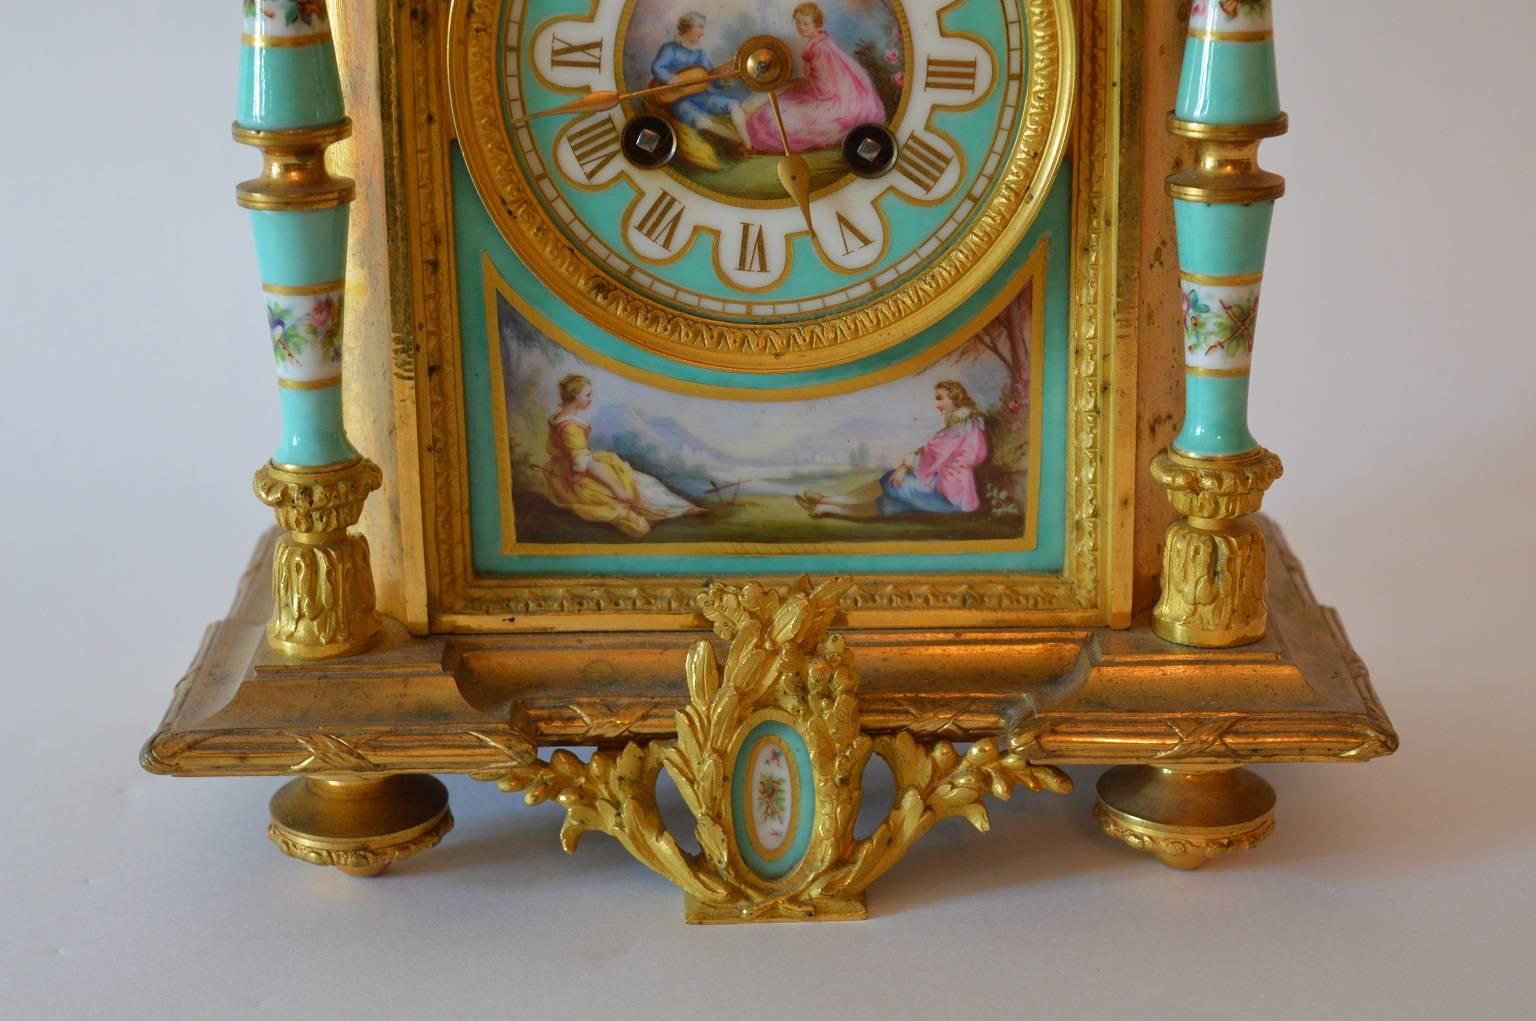 19th century hand-painted porcelain and gilt bronze clock.